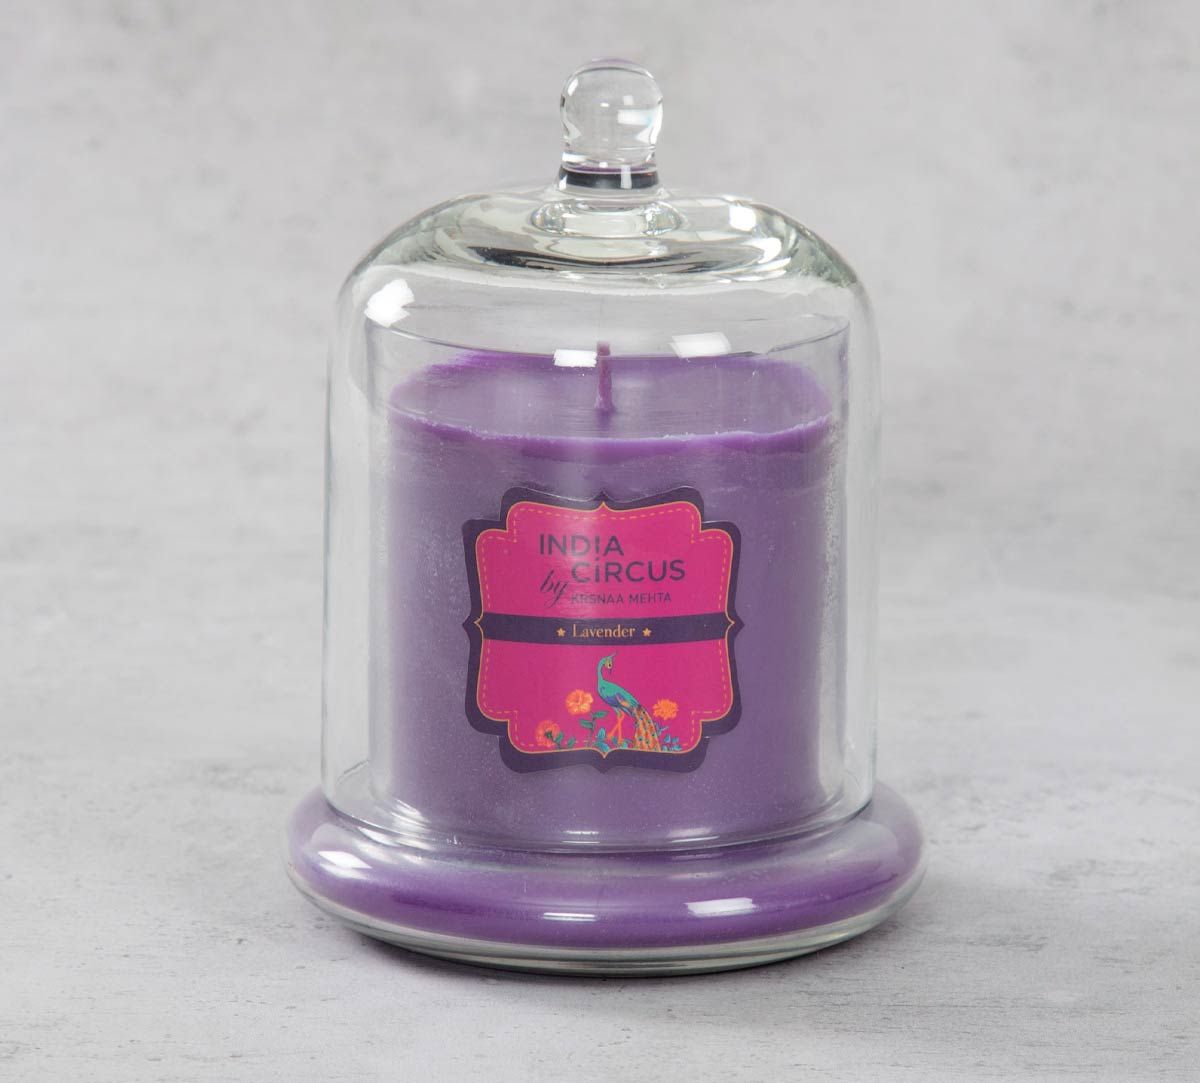 India Circus Lavender Glass Jar Scented Candle